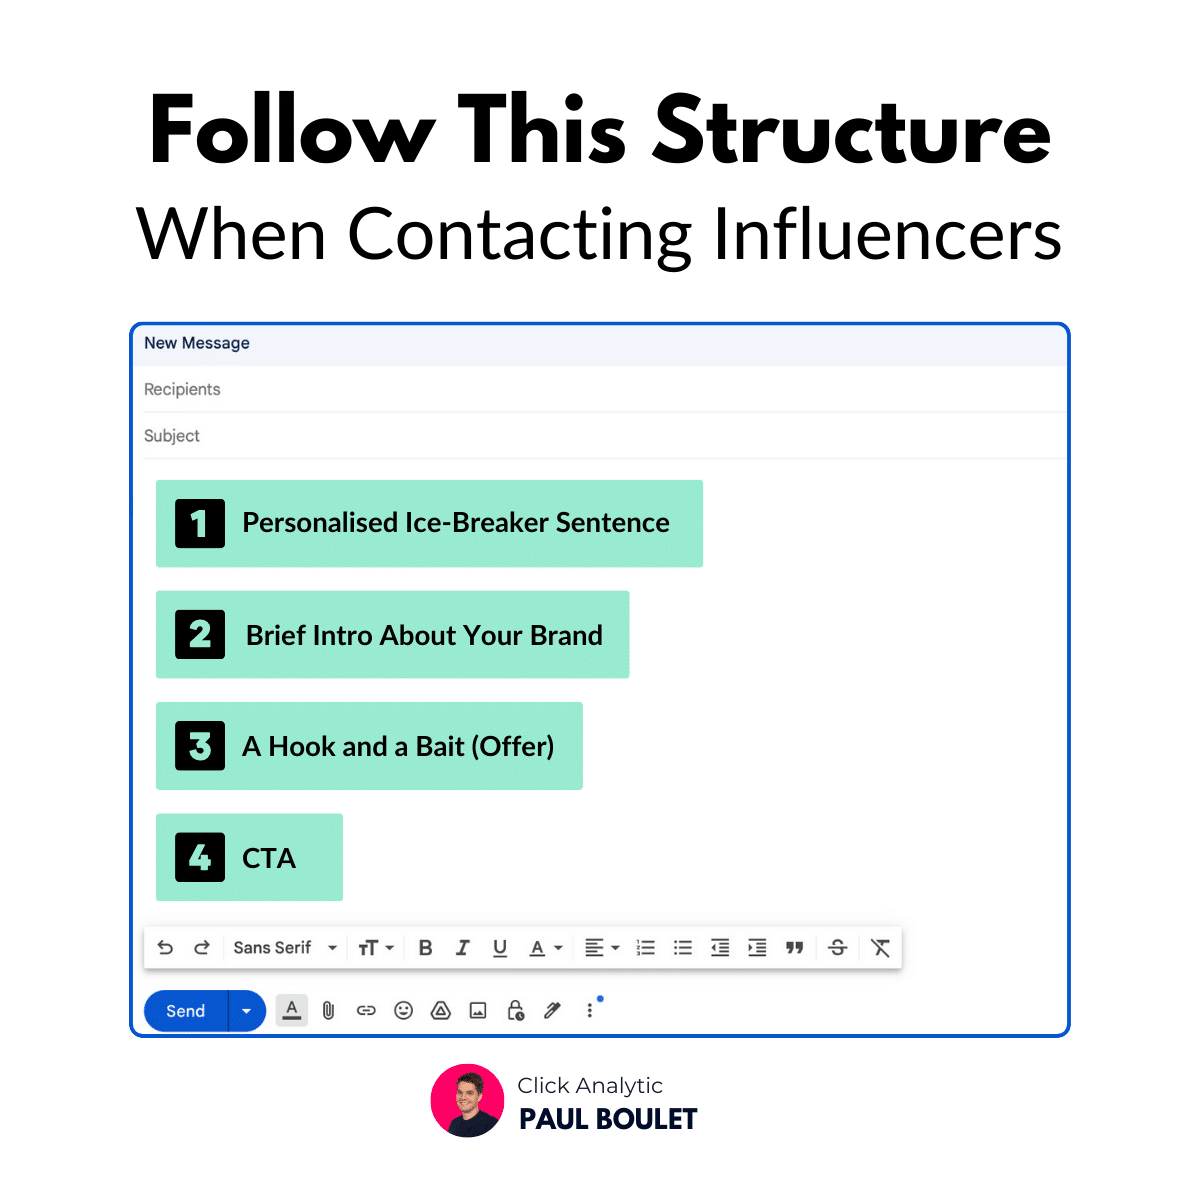 Graphic titled "follow this structure when contacting Düsseldorf influencers" with a list of steps: personalized introduction, brief ice-breaker sentence, a hook and a bait (offer), and CTA